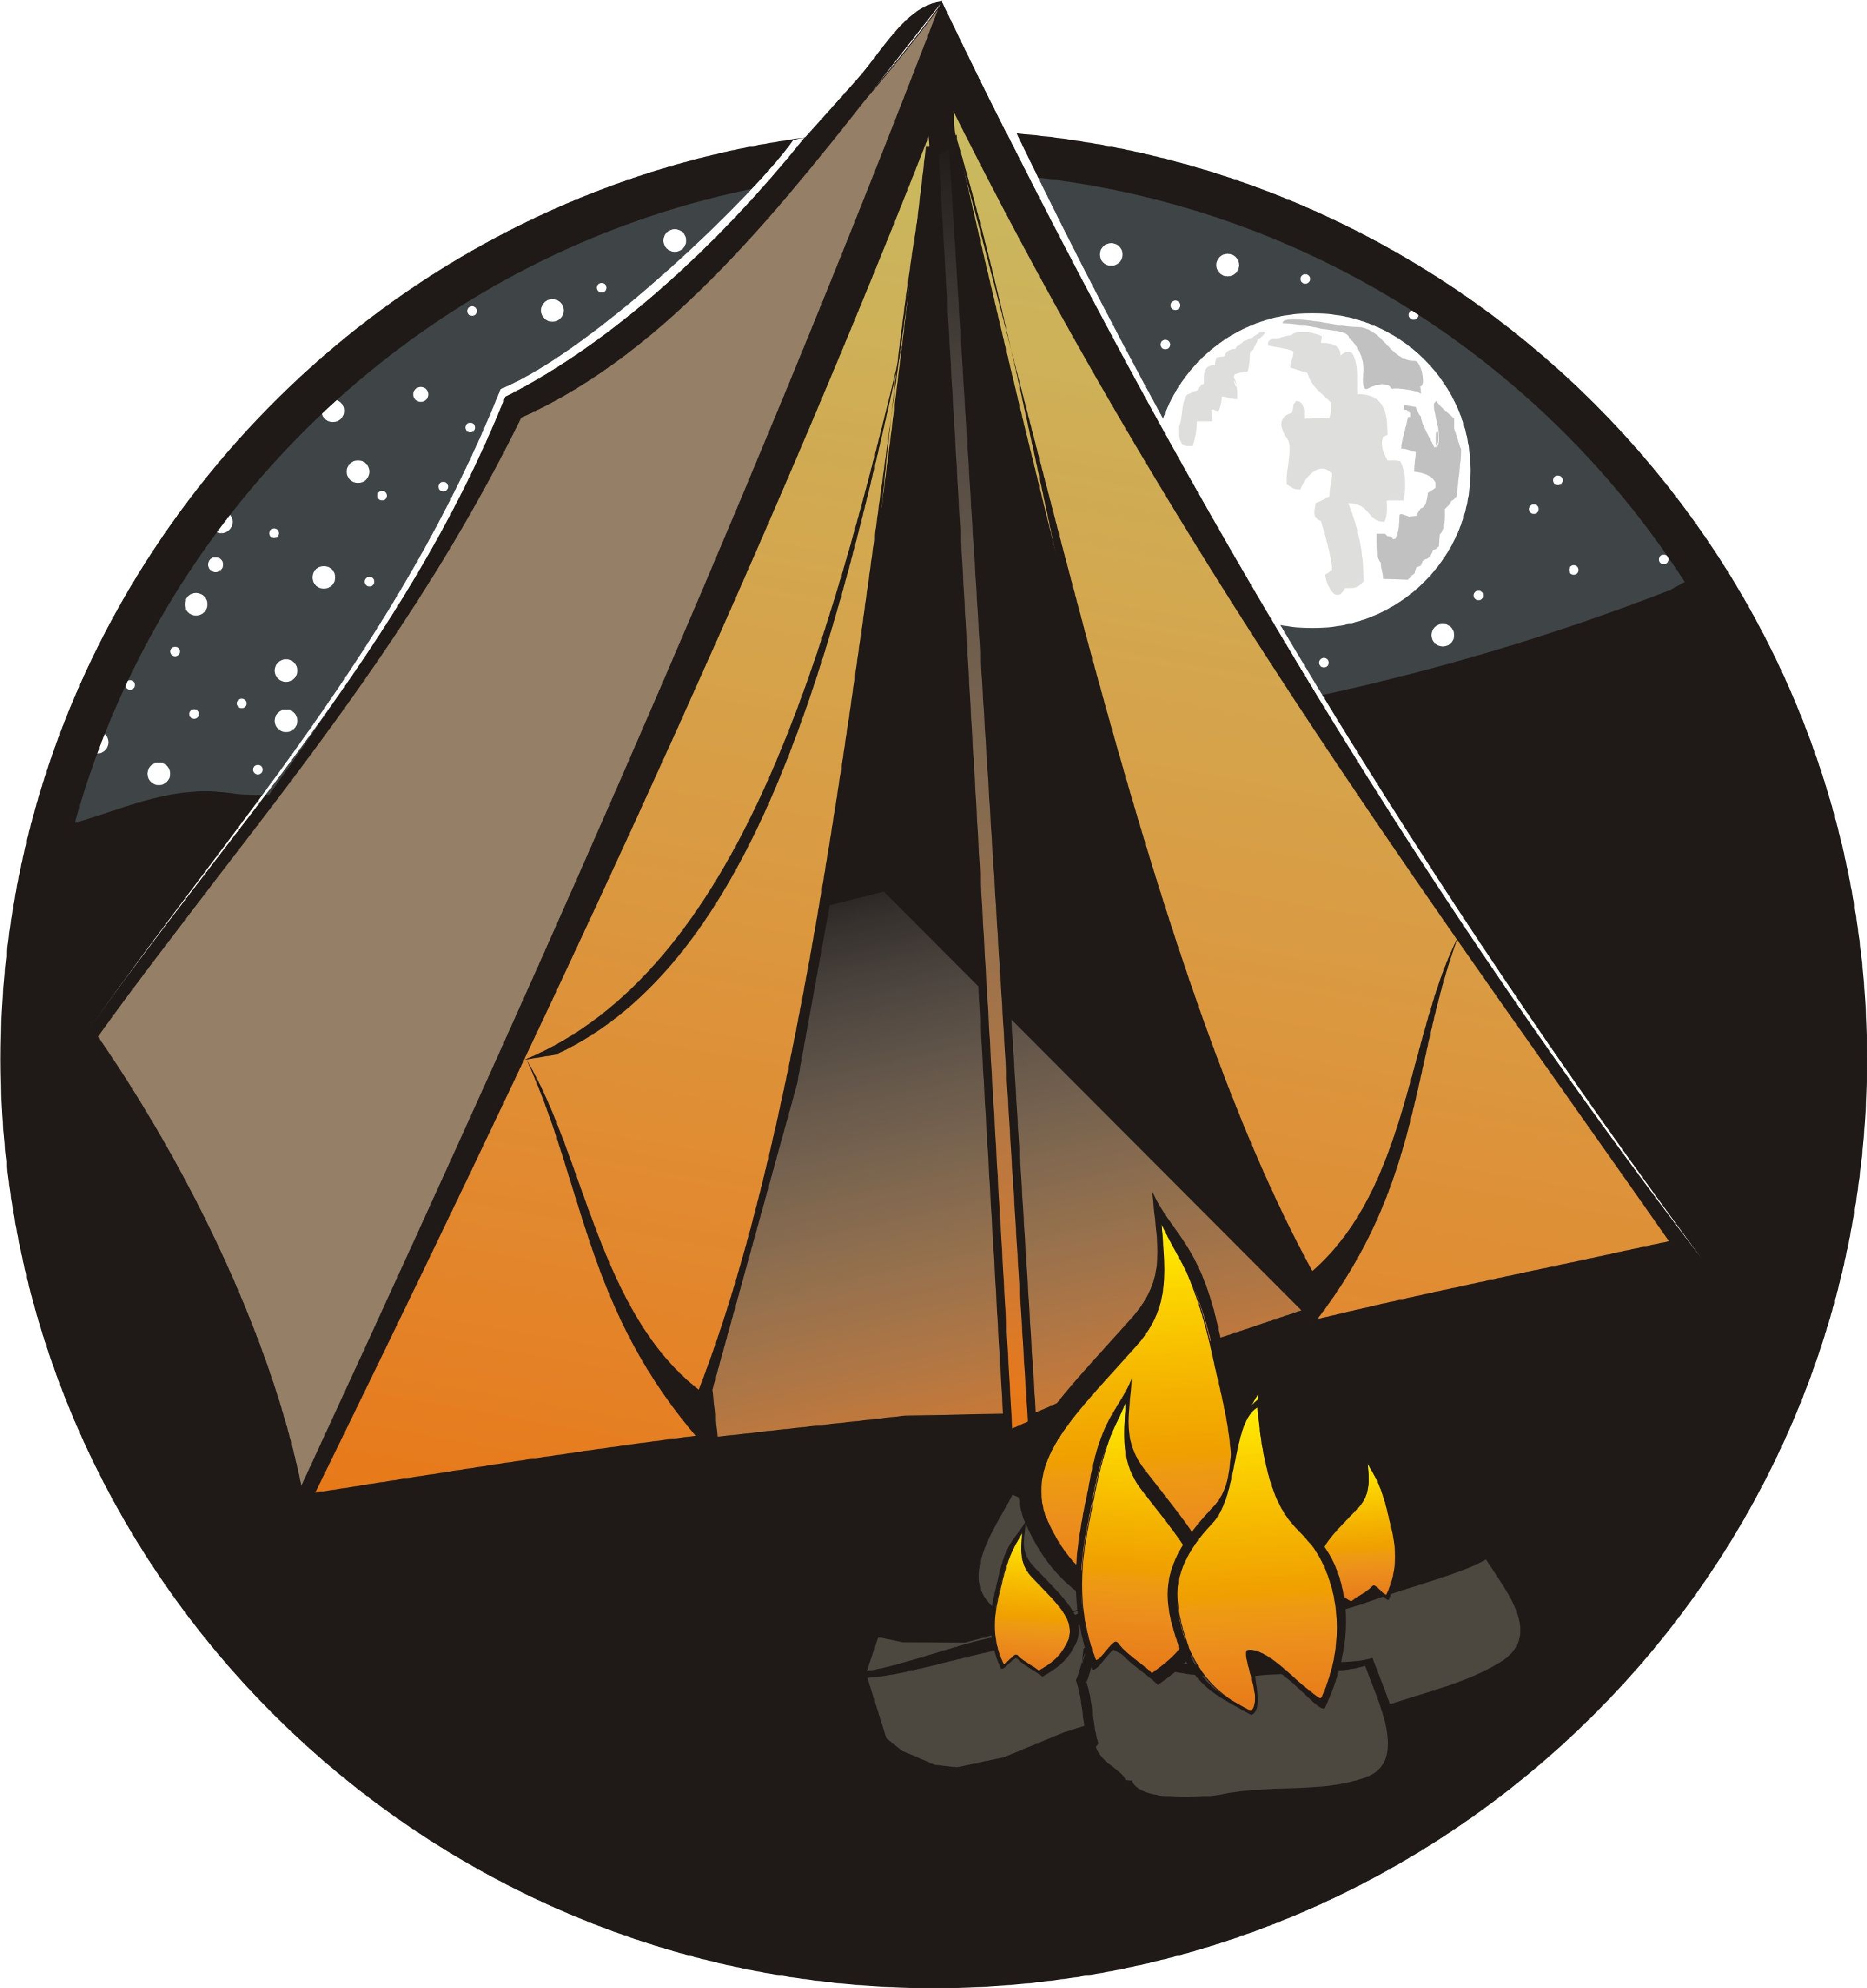 scaffolding clipart,camping clipart,yurt clipart,carp clipart,bed clipart.....